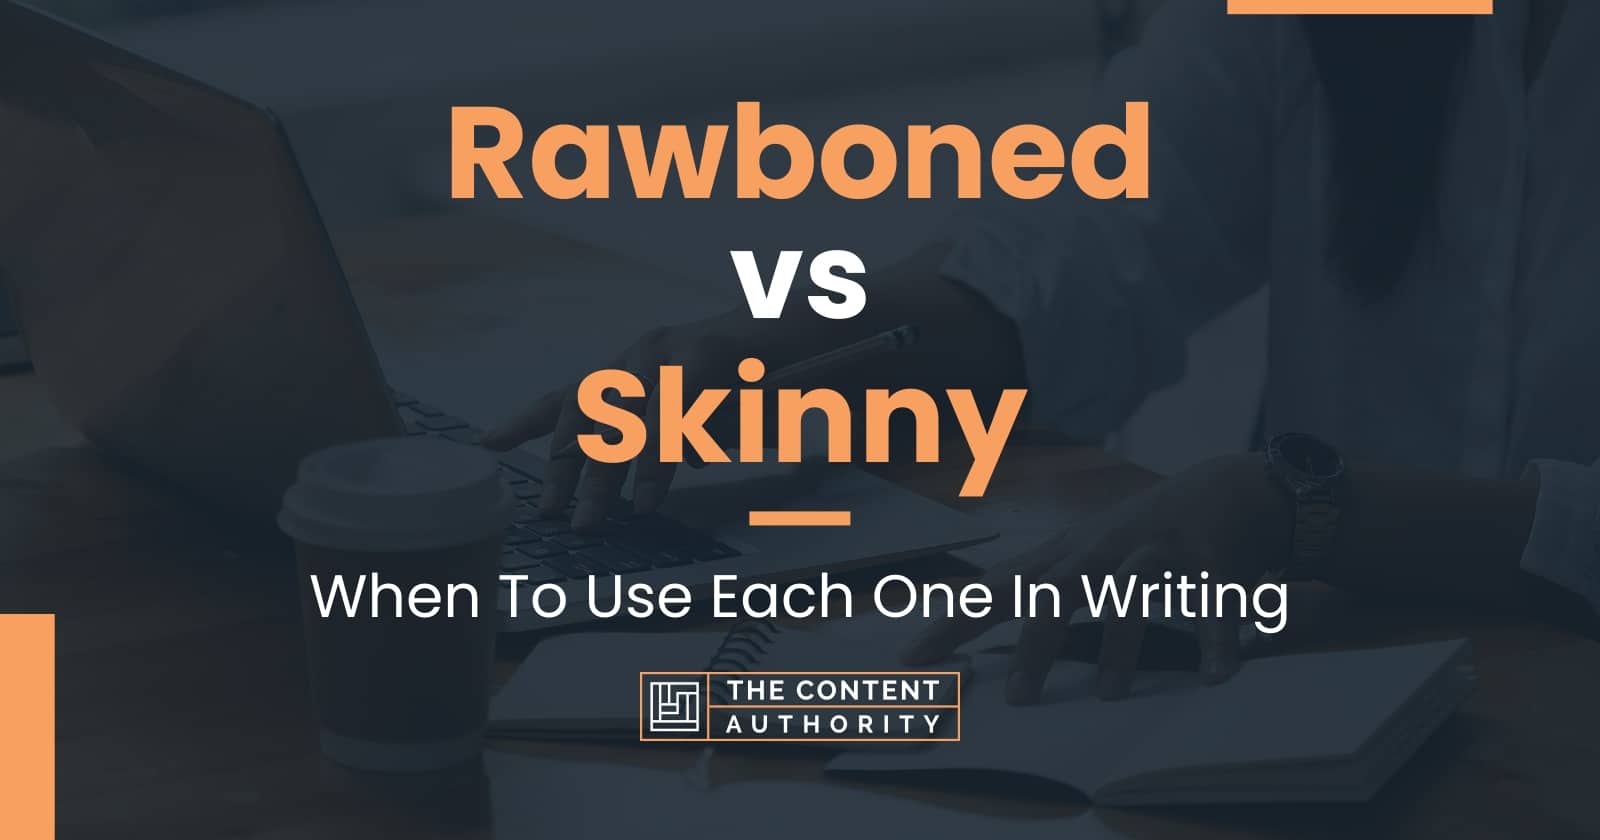 Rawboned Vs Skinny When To Use Each One In Writing